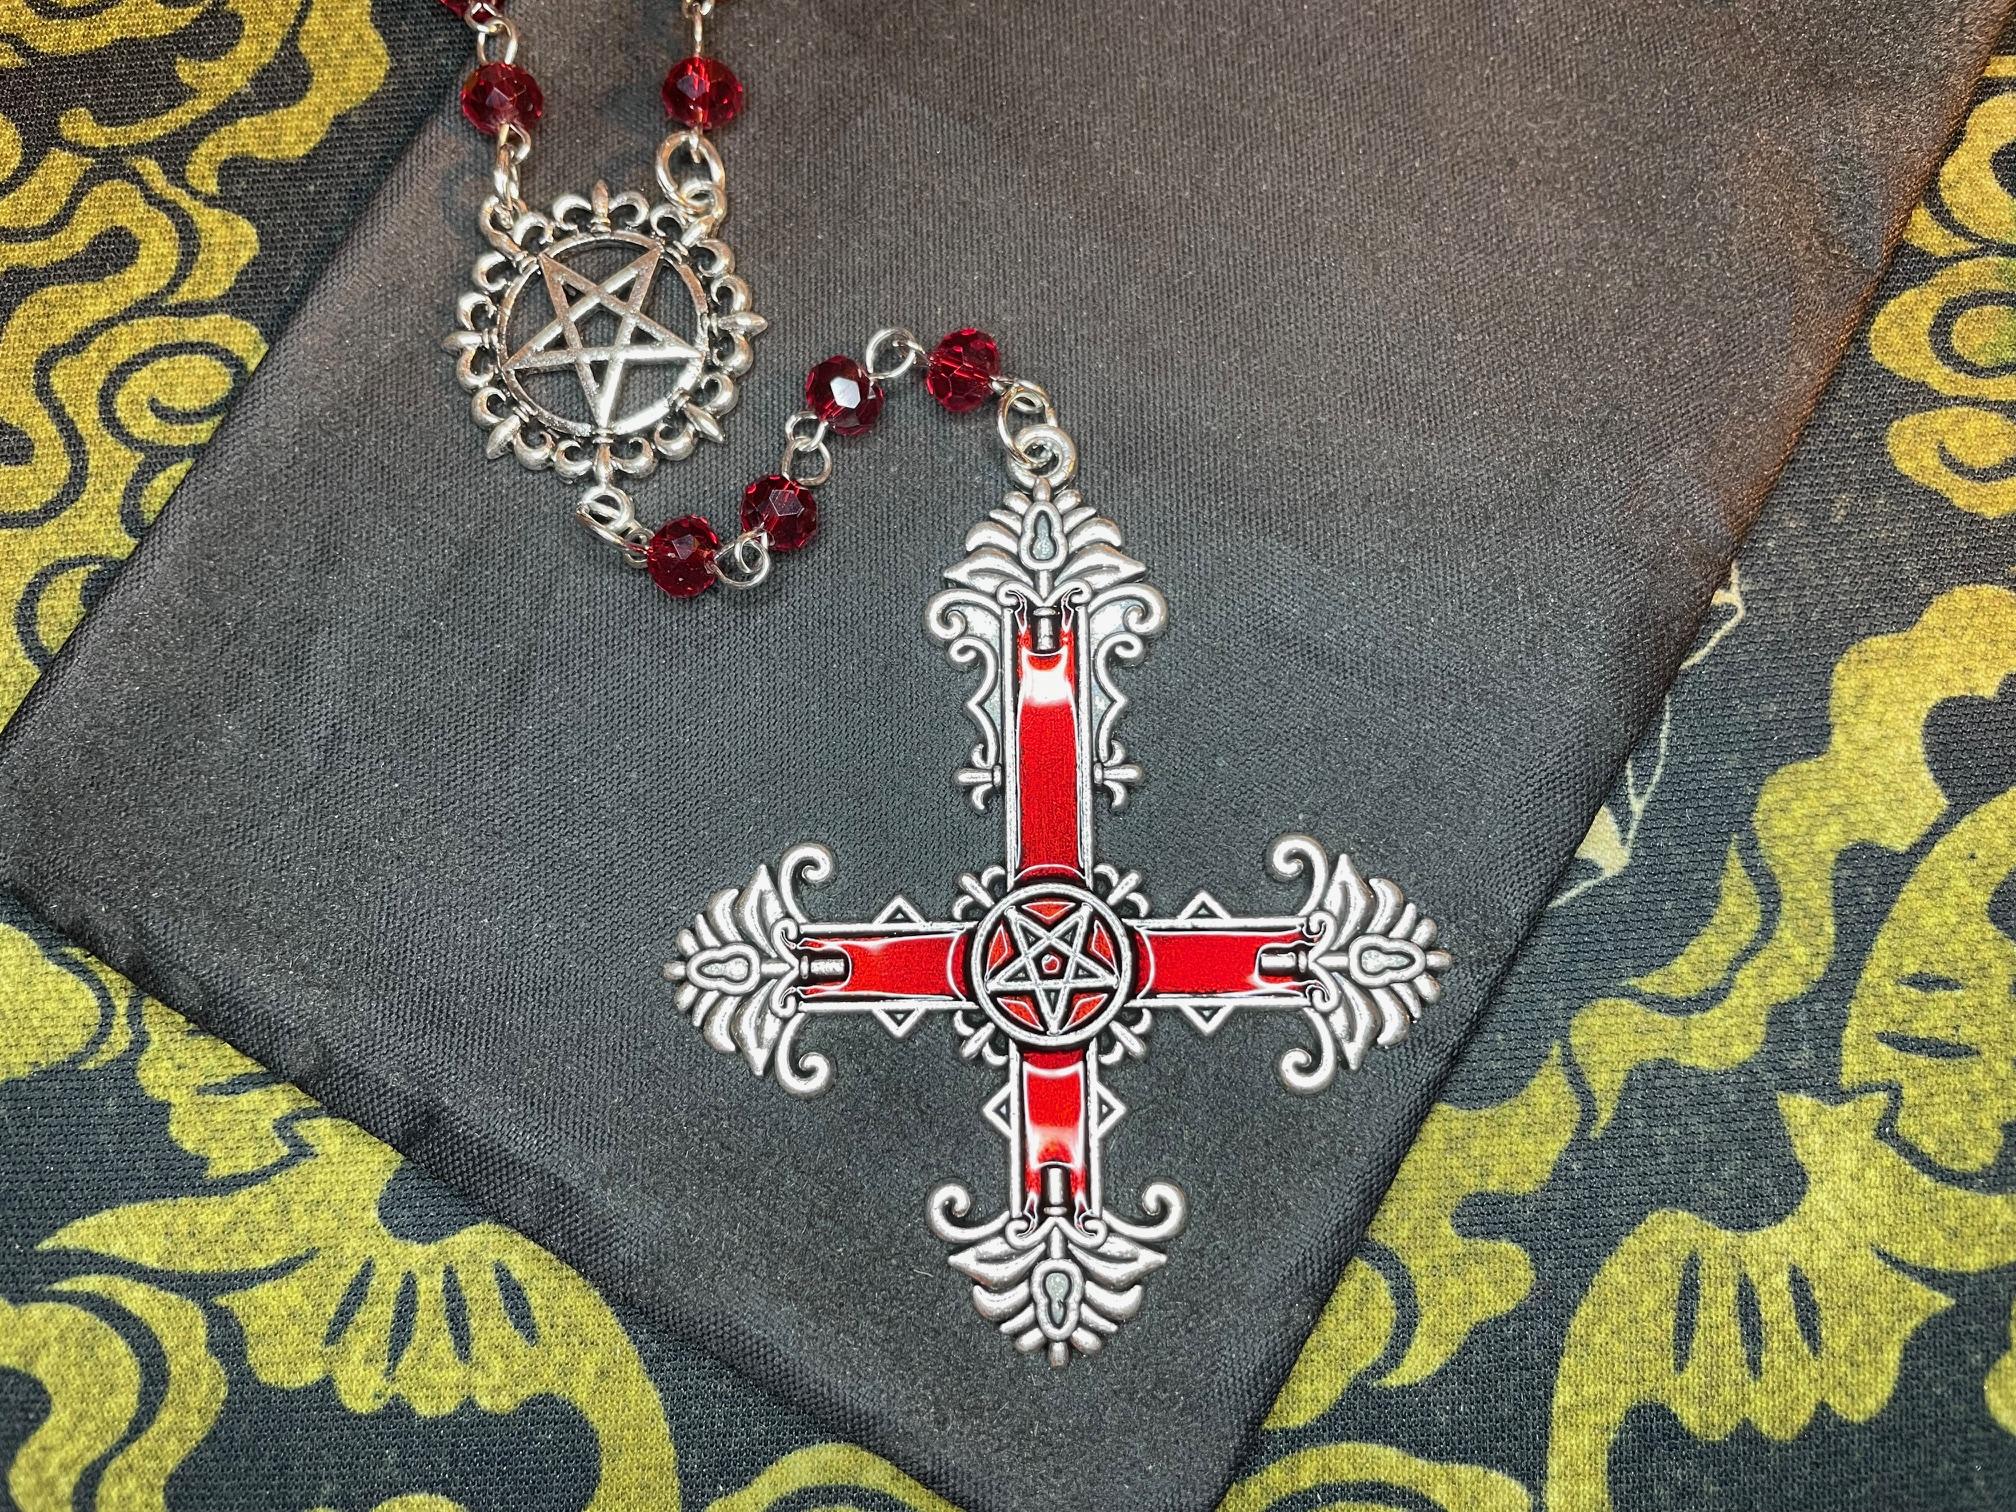 Satanic Rosary Inverted Pentagram Ornate Upside Down Cross 666 Pendant Witchcraft Black Magic Wiccan Occult Necklace Silver Red Darkness Jewelry